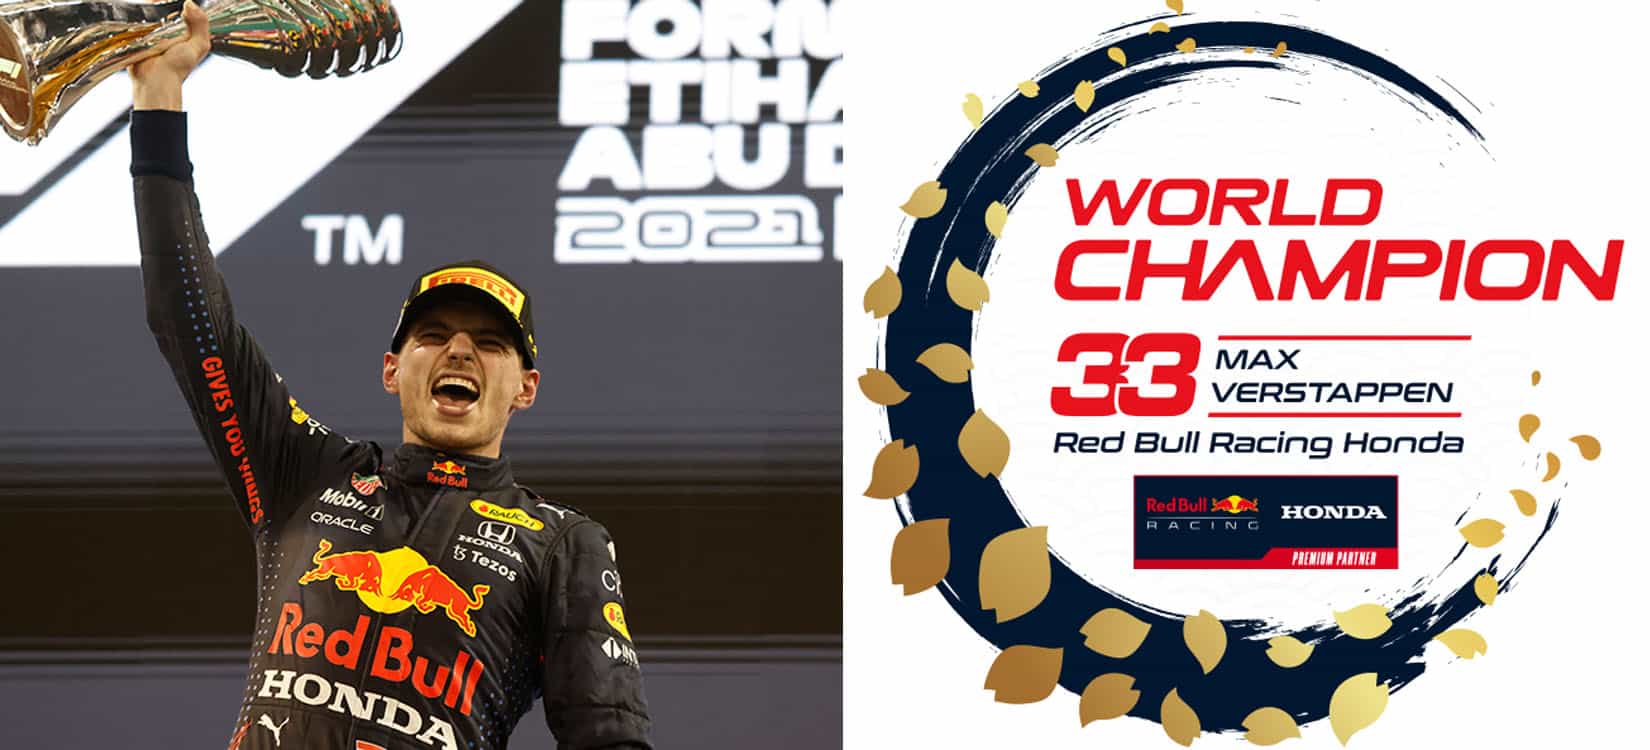 Max Verstappen bags the 2021 F1 Driver's World Championship Trophy